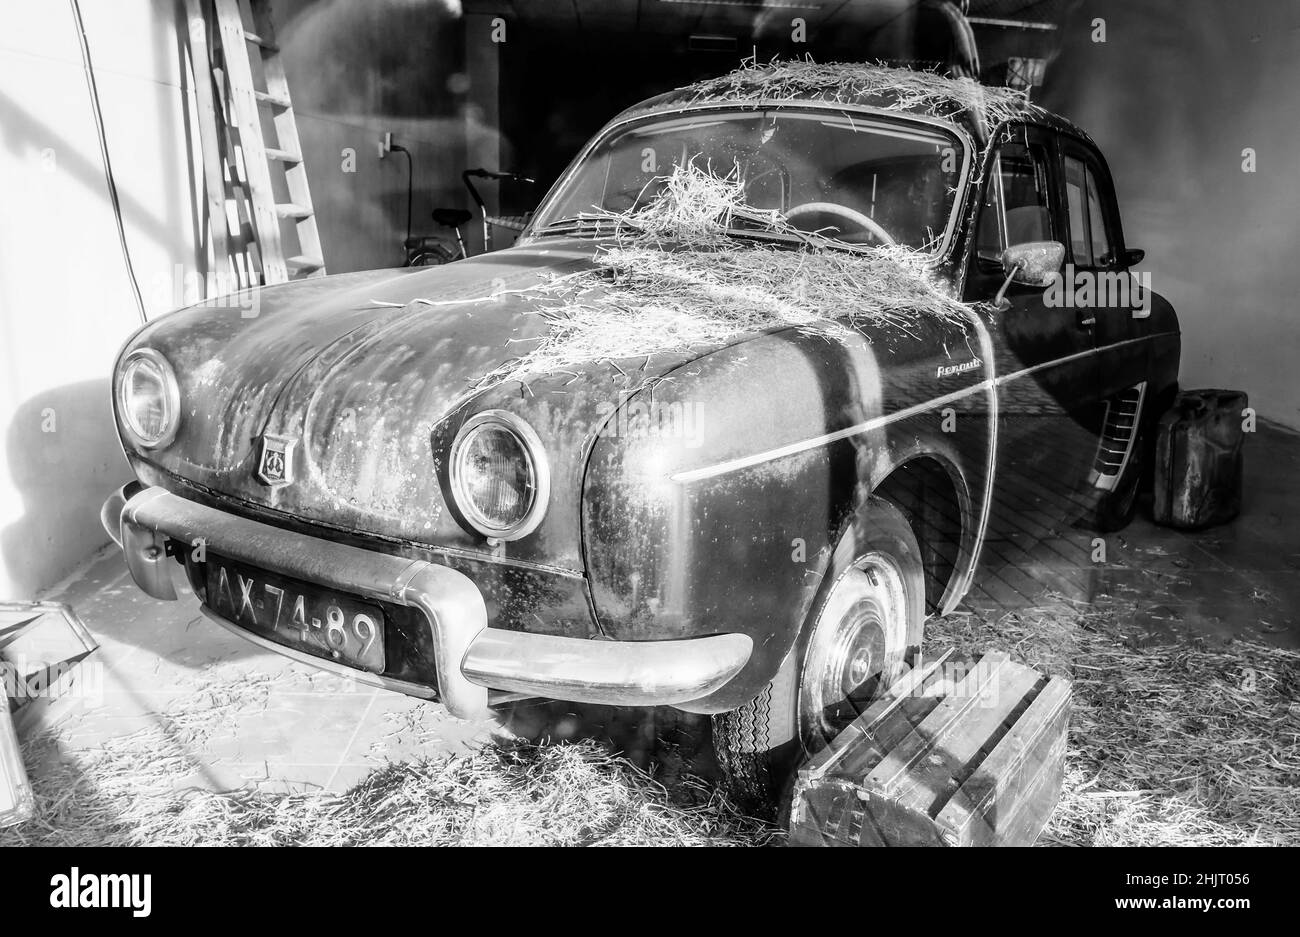 barn find 1959 Renault Dauphine in a showroom Stock Photo